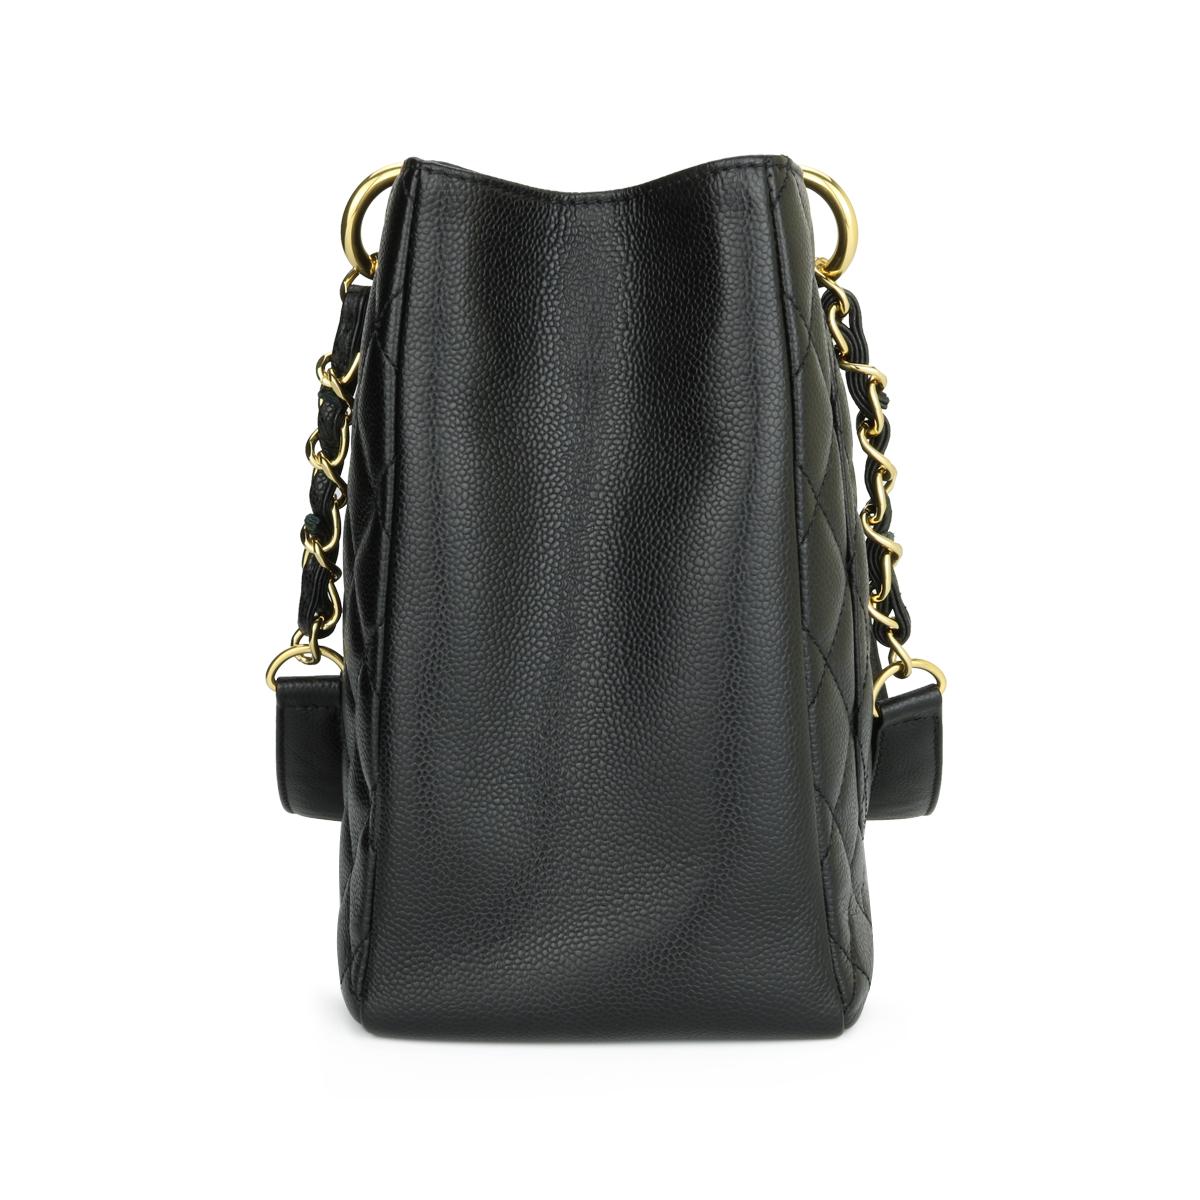 black tote bag with gold hardware